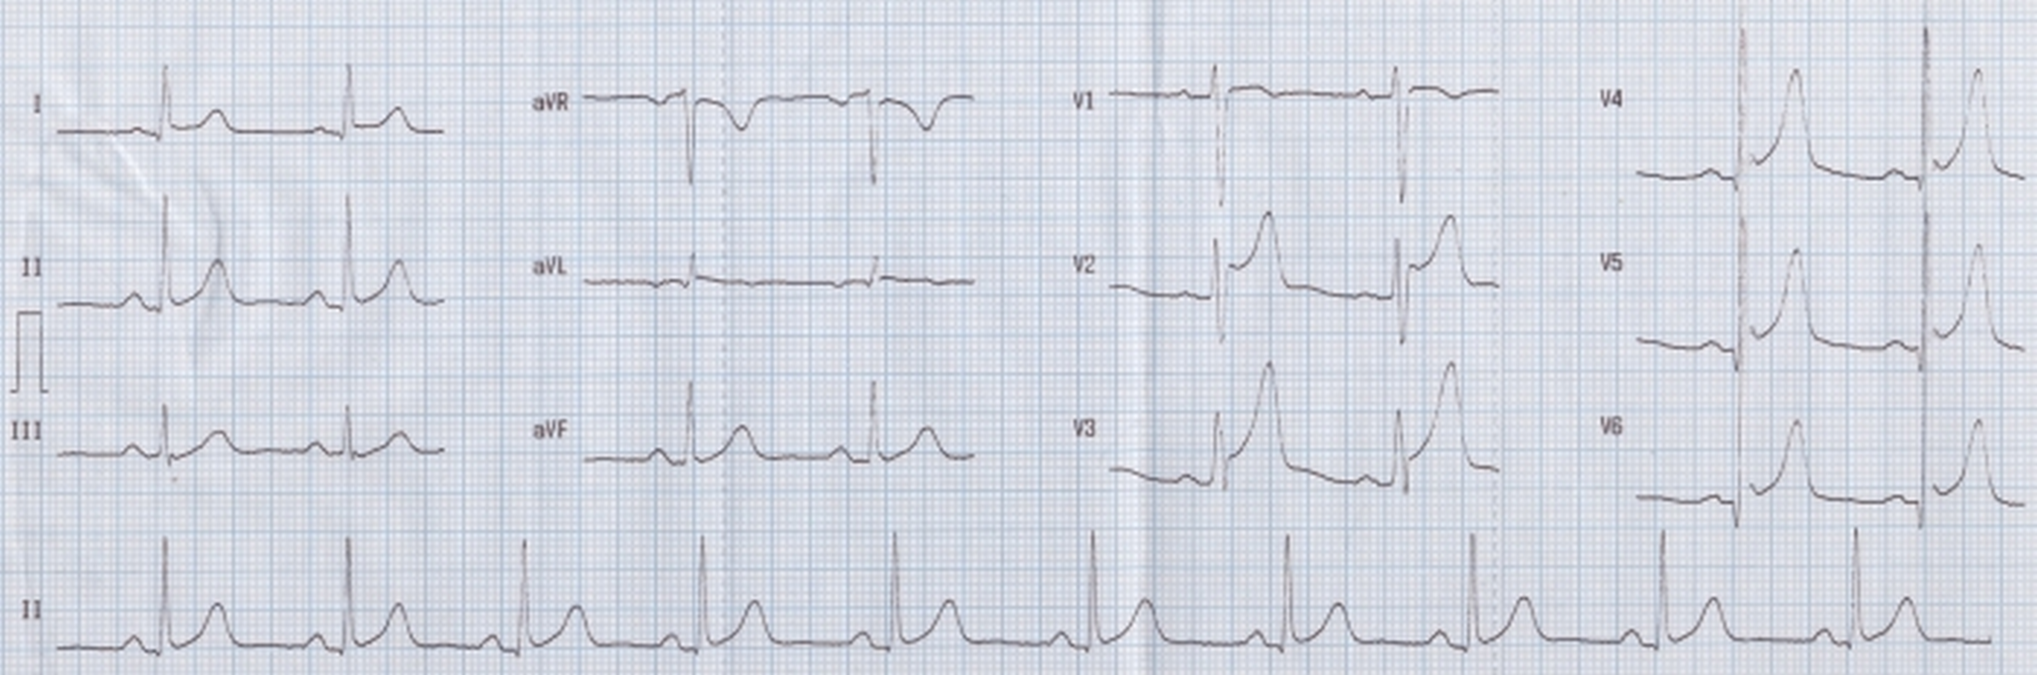 Early repolarization syndrome (ERPS)